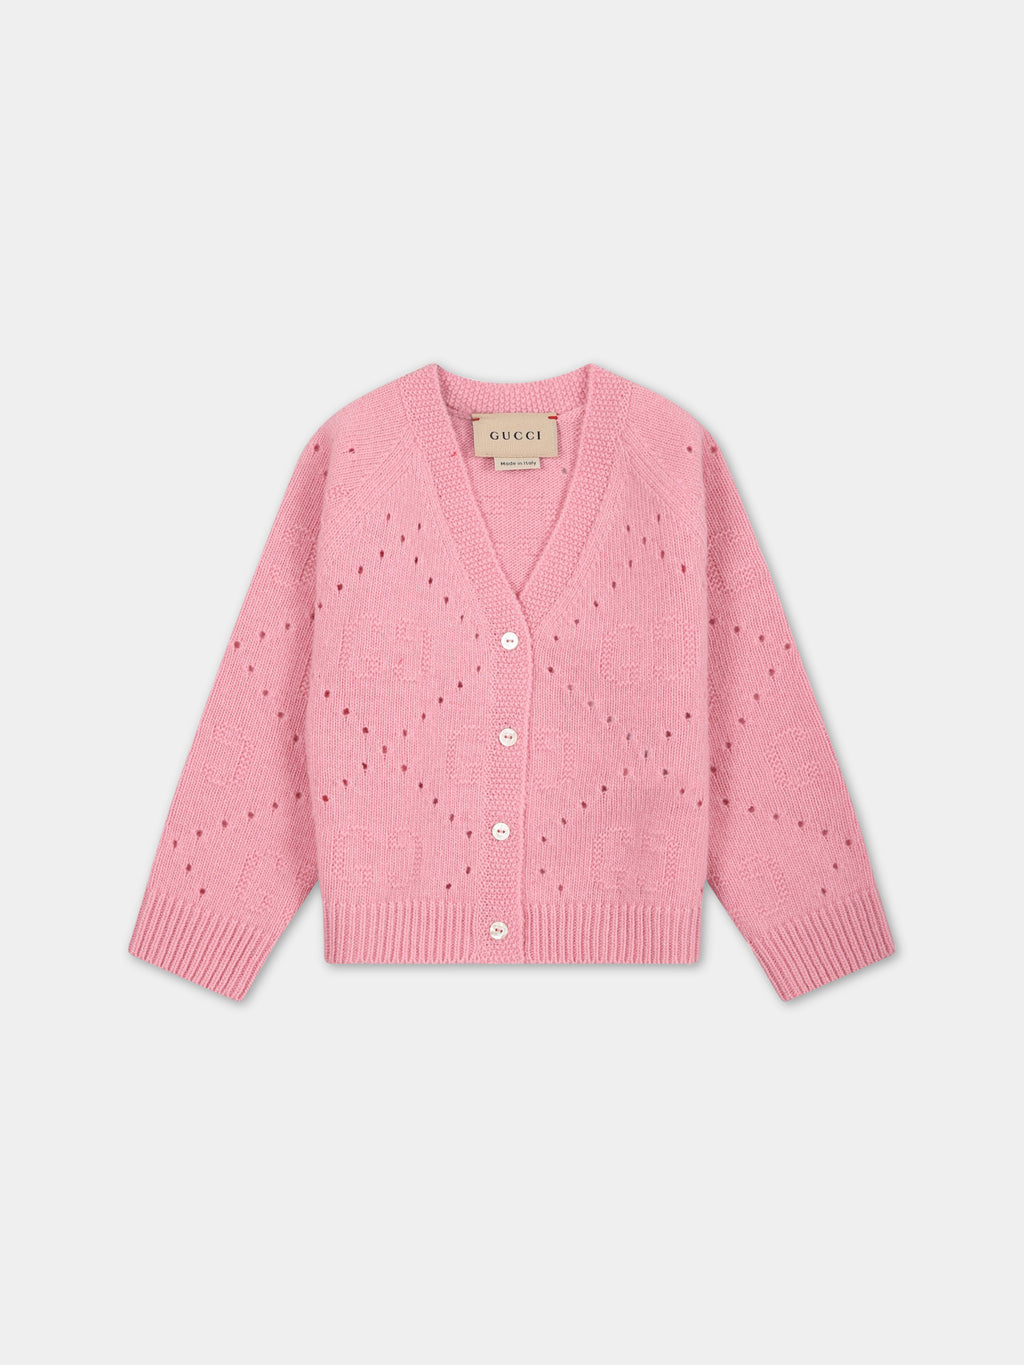 Pink cardigan for baby girl with GG